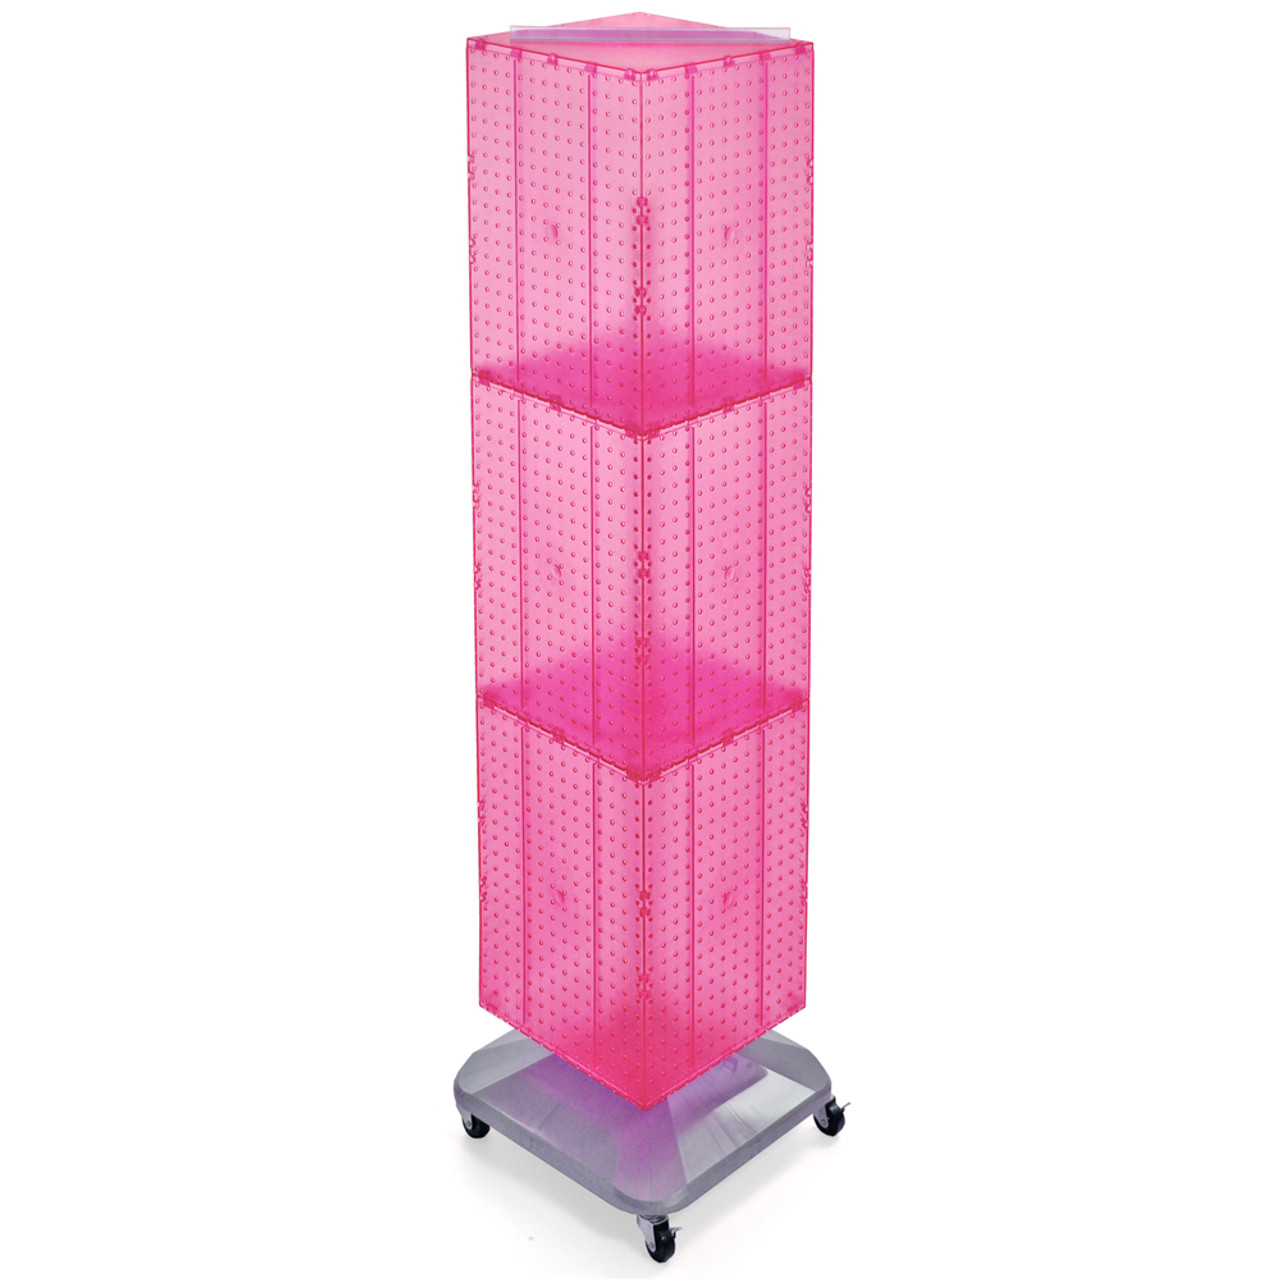 4-Sided Multi-Tiered Acrylic Rotating Display Stand - Great for Statio -  TorchedDisplays